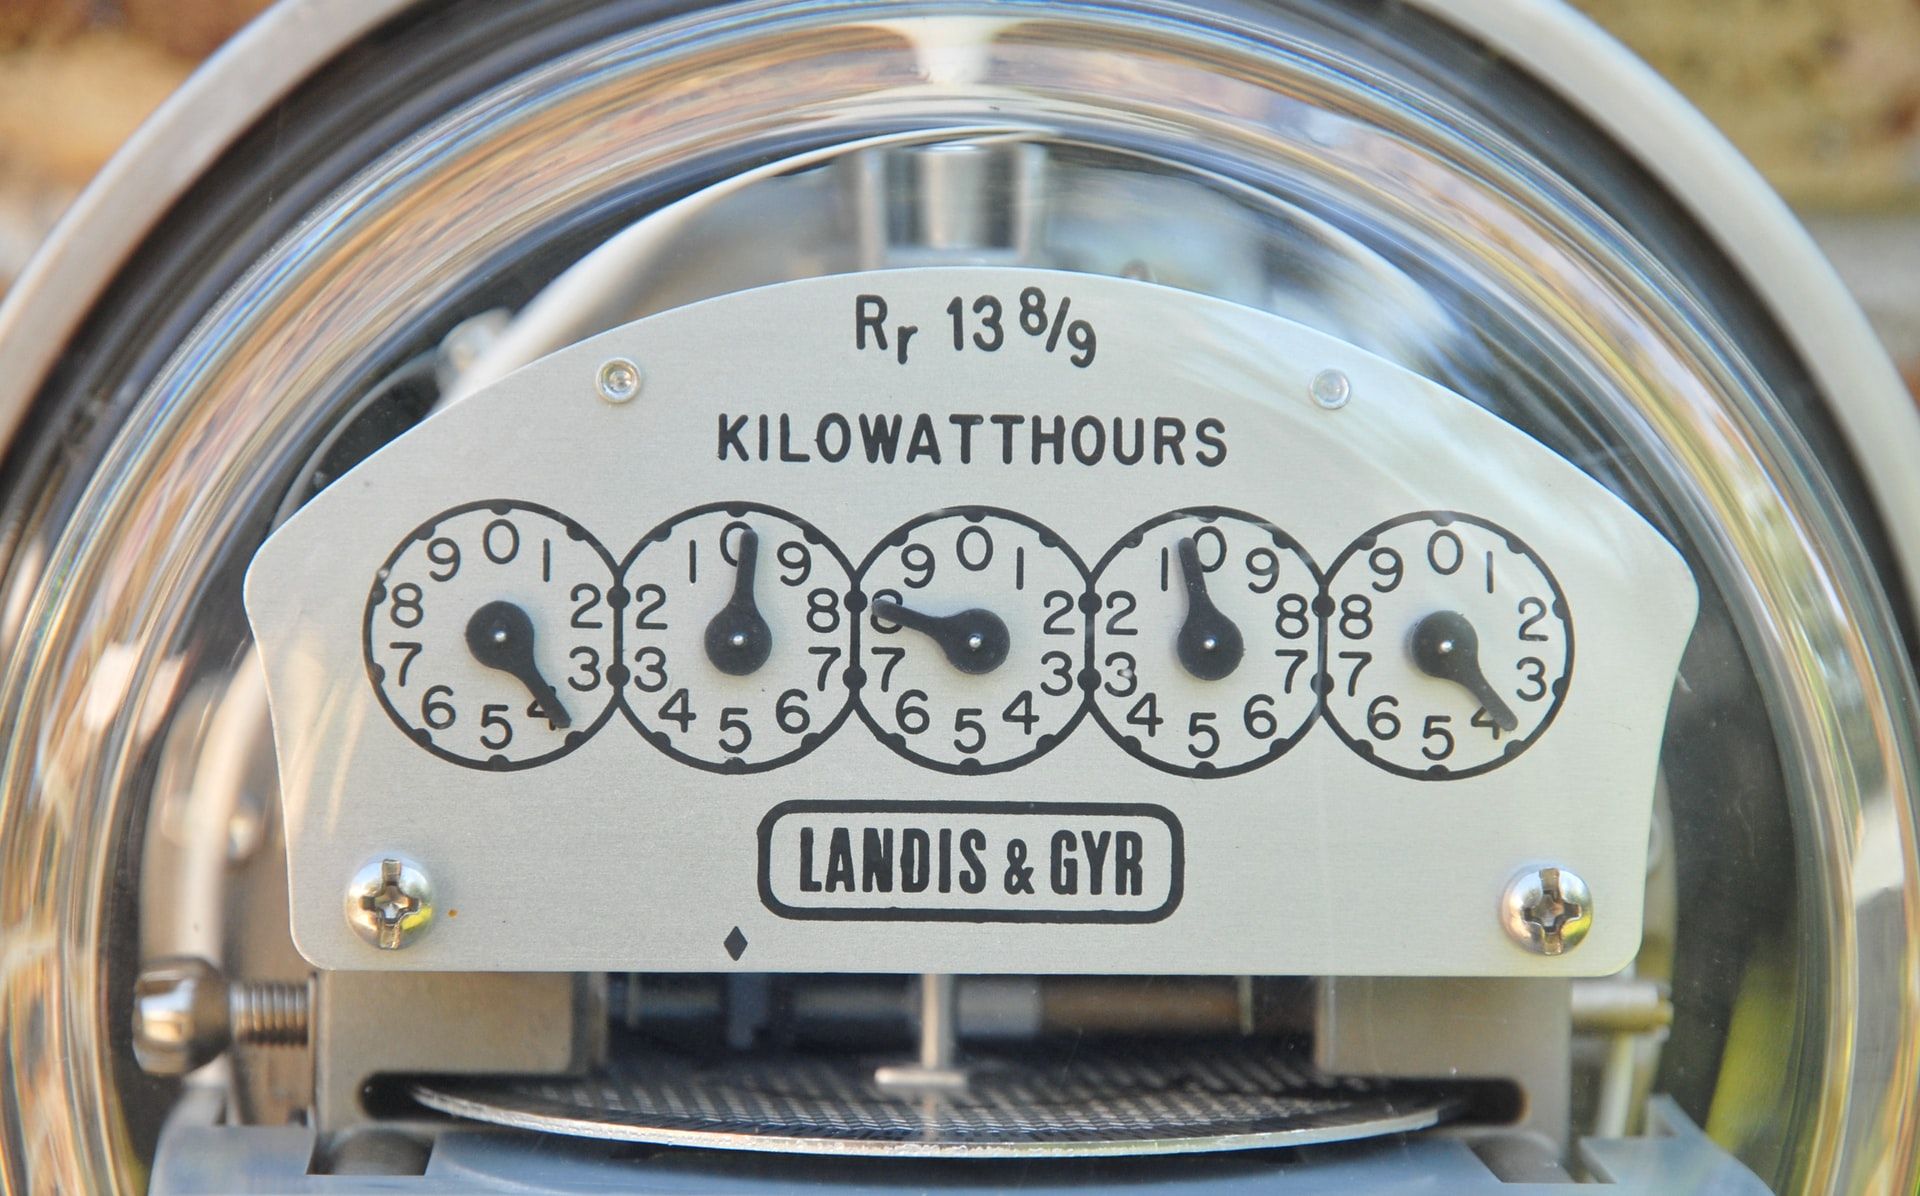 Image of an analog electricity meter